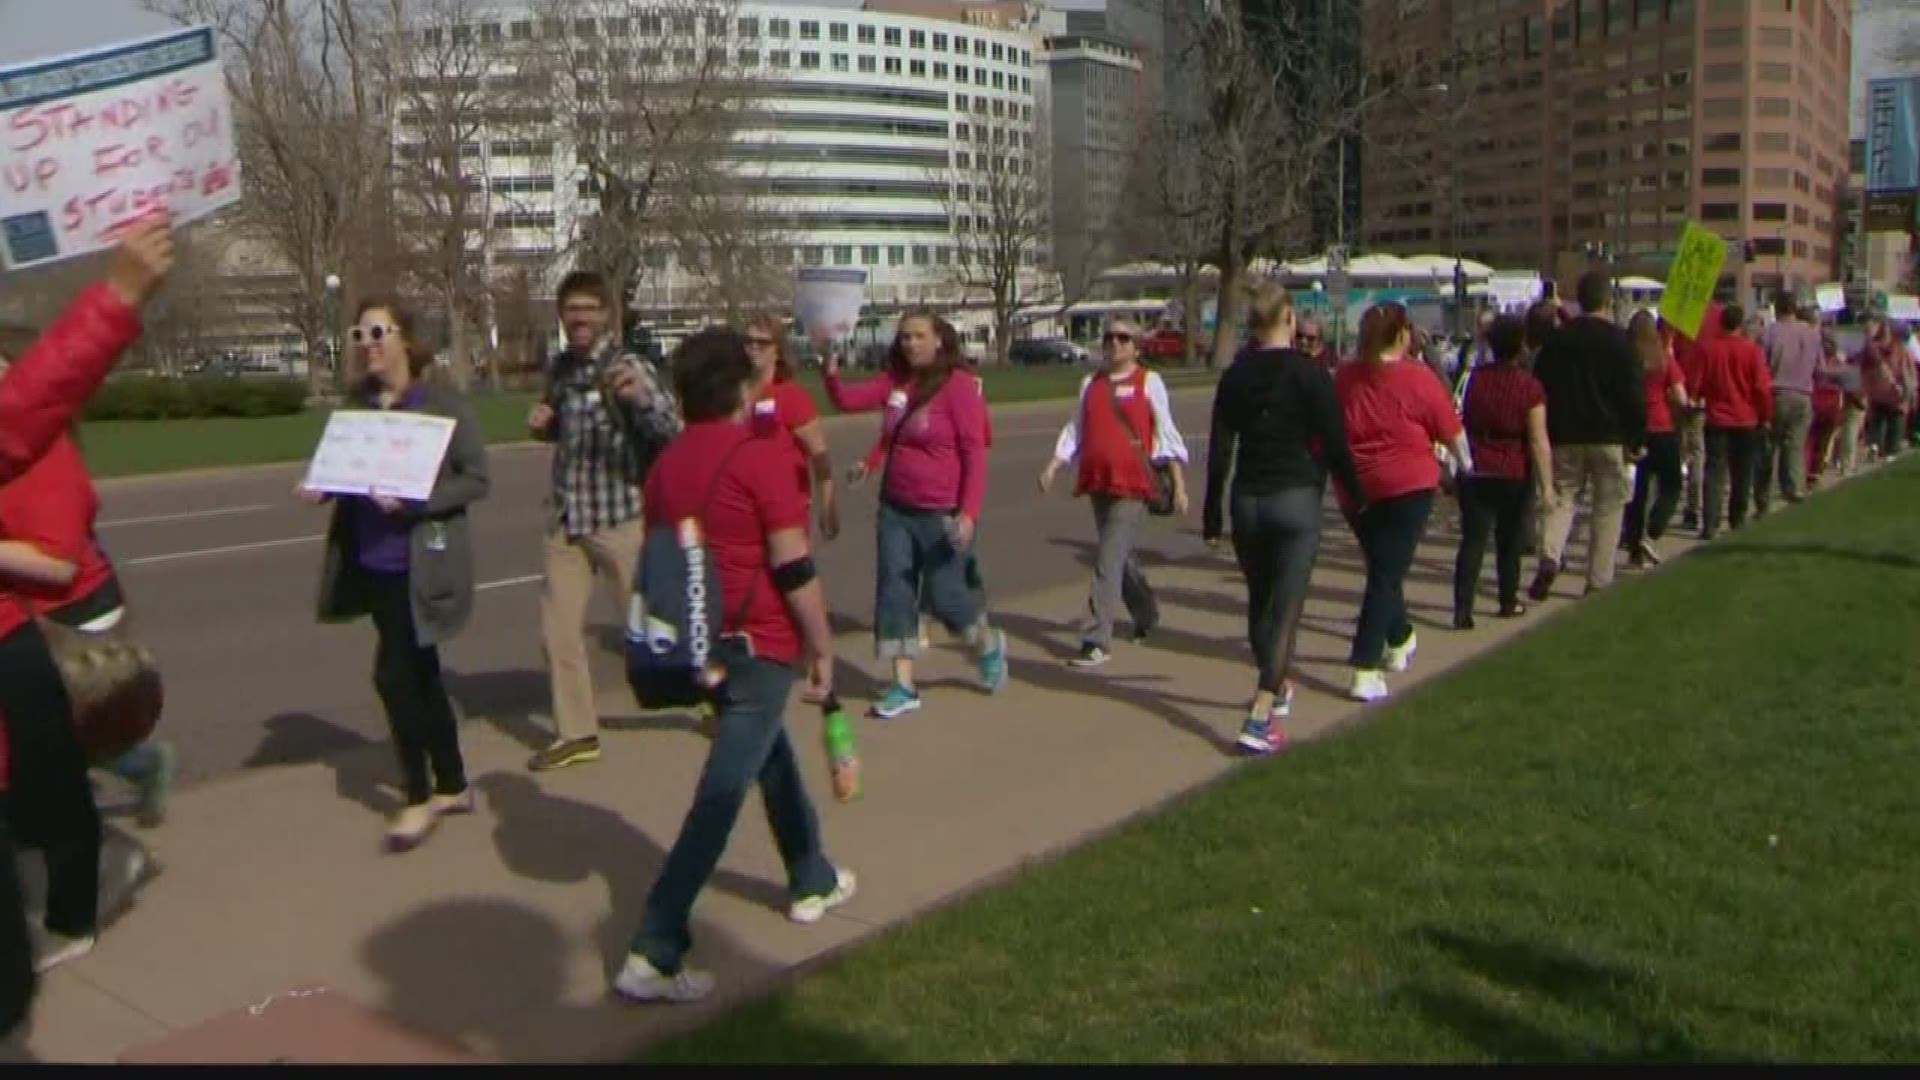 The teachers said they were protesting for better education funding and protections for their pension plans.